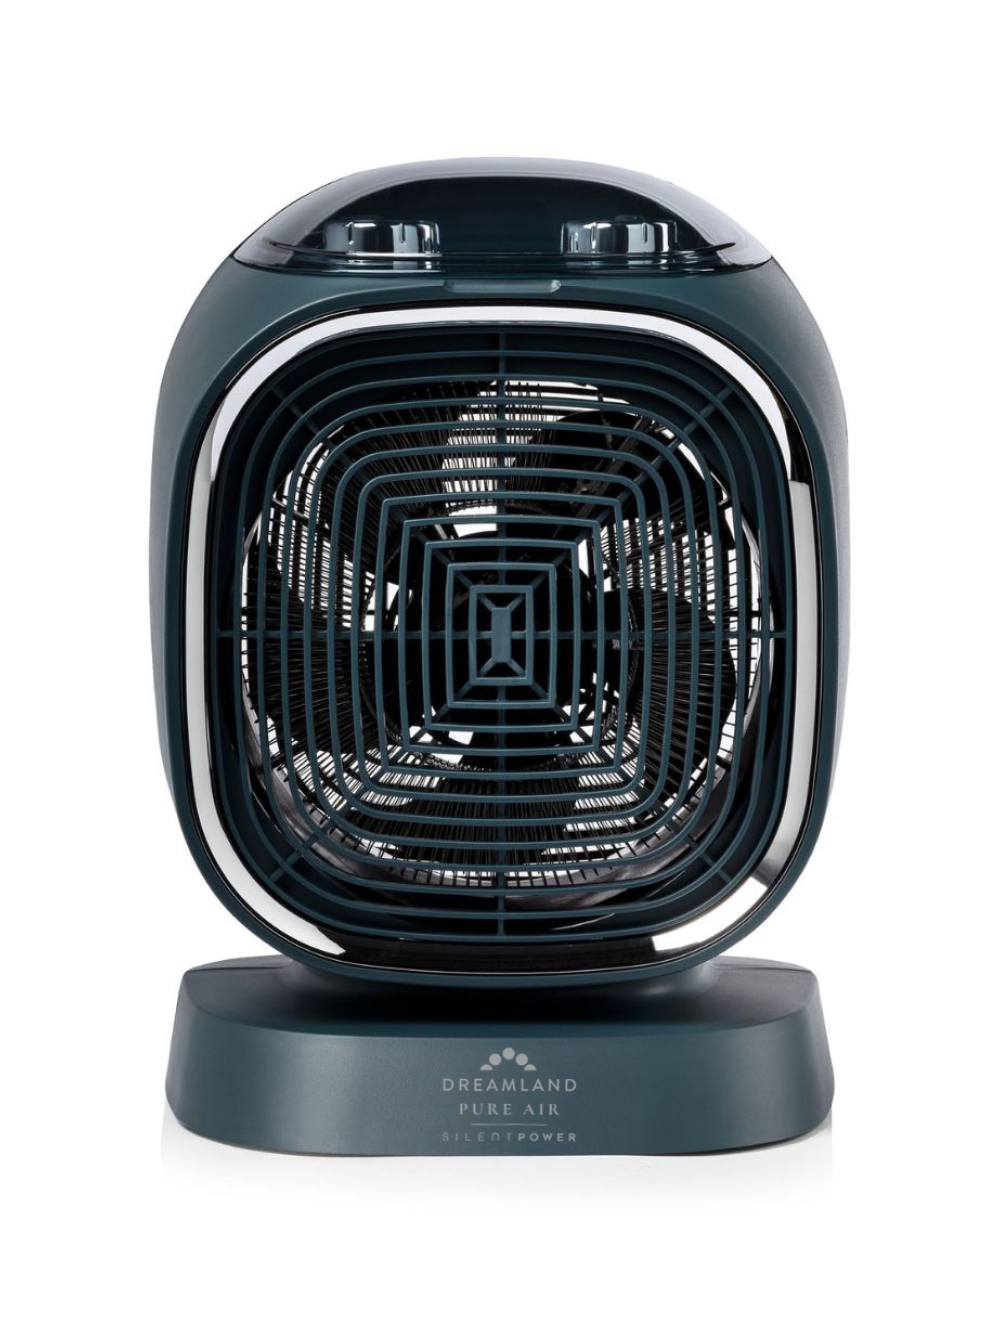 Dreamland Silent Power Pure Fan Heater featured image